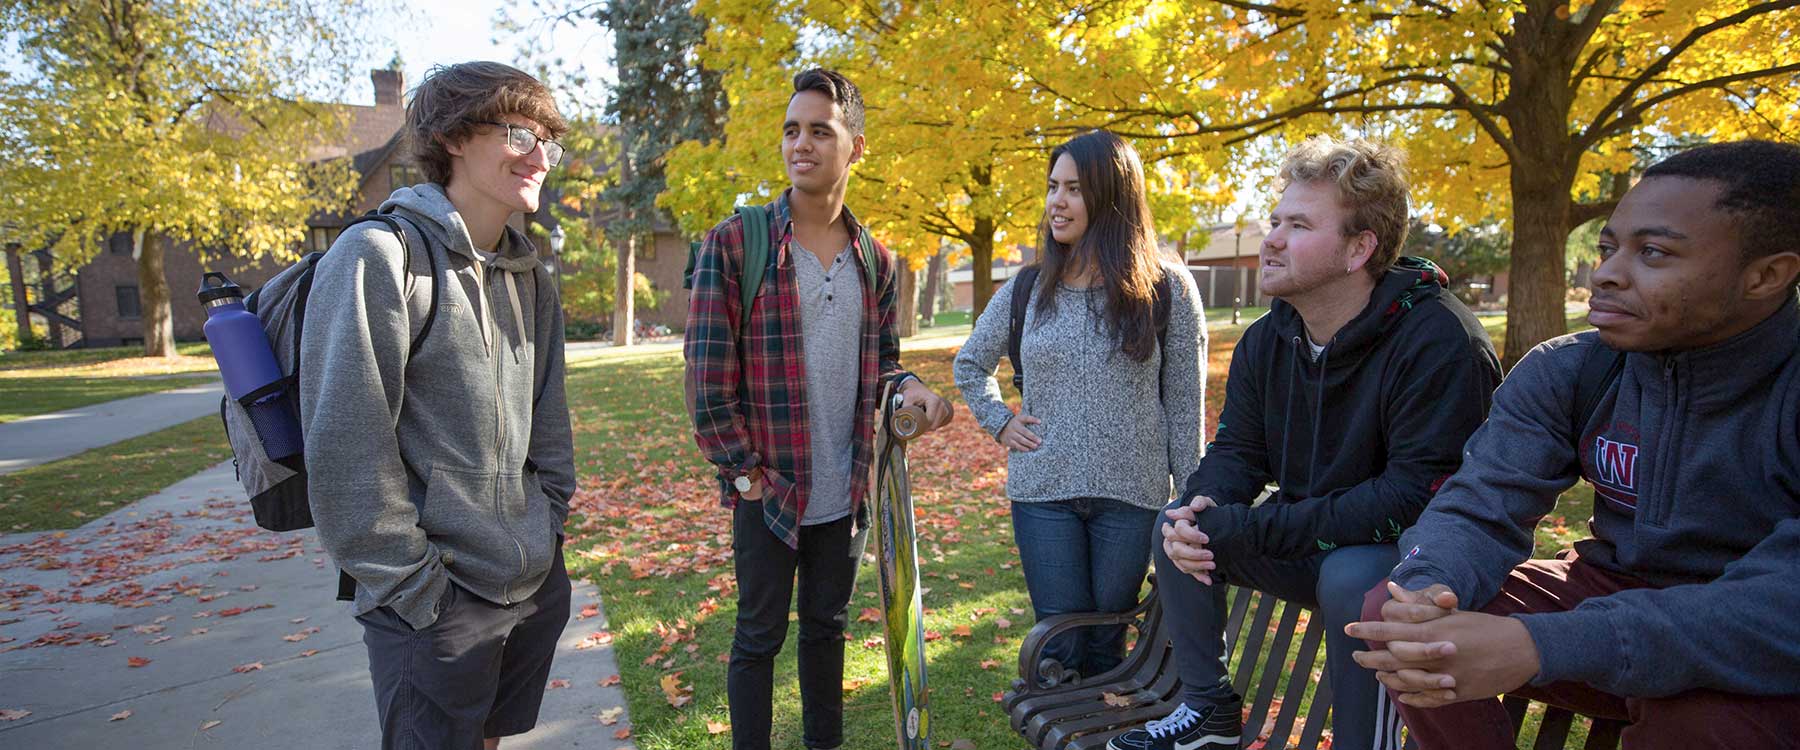 A group of students talk with one another while on campus.